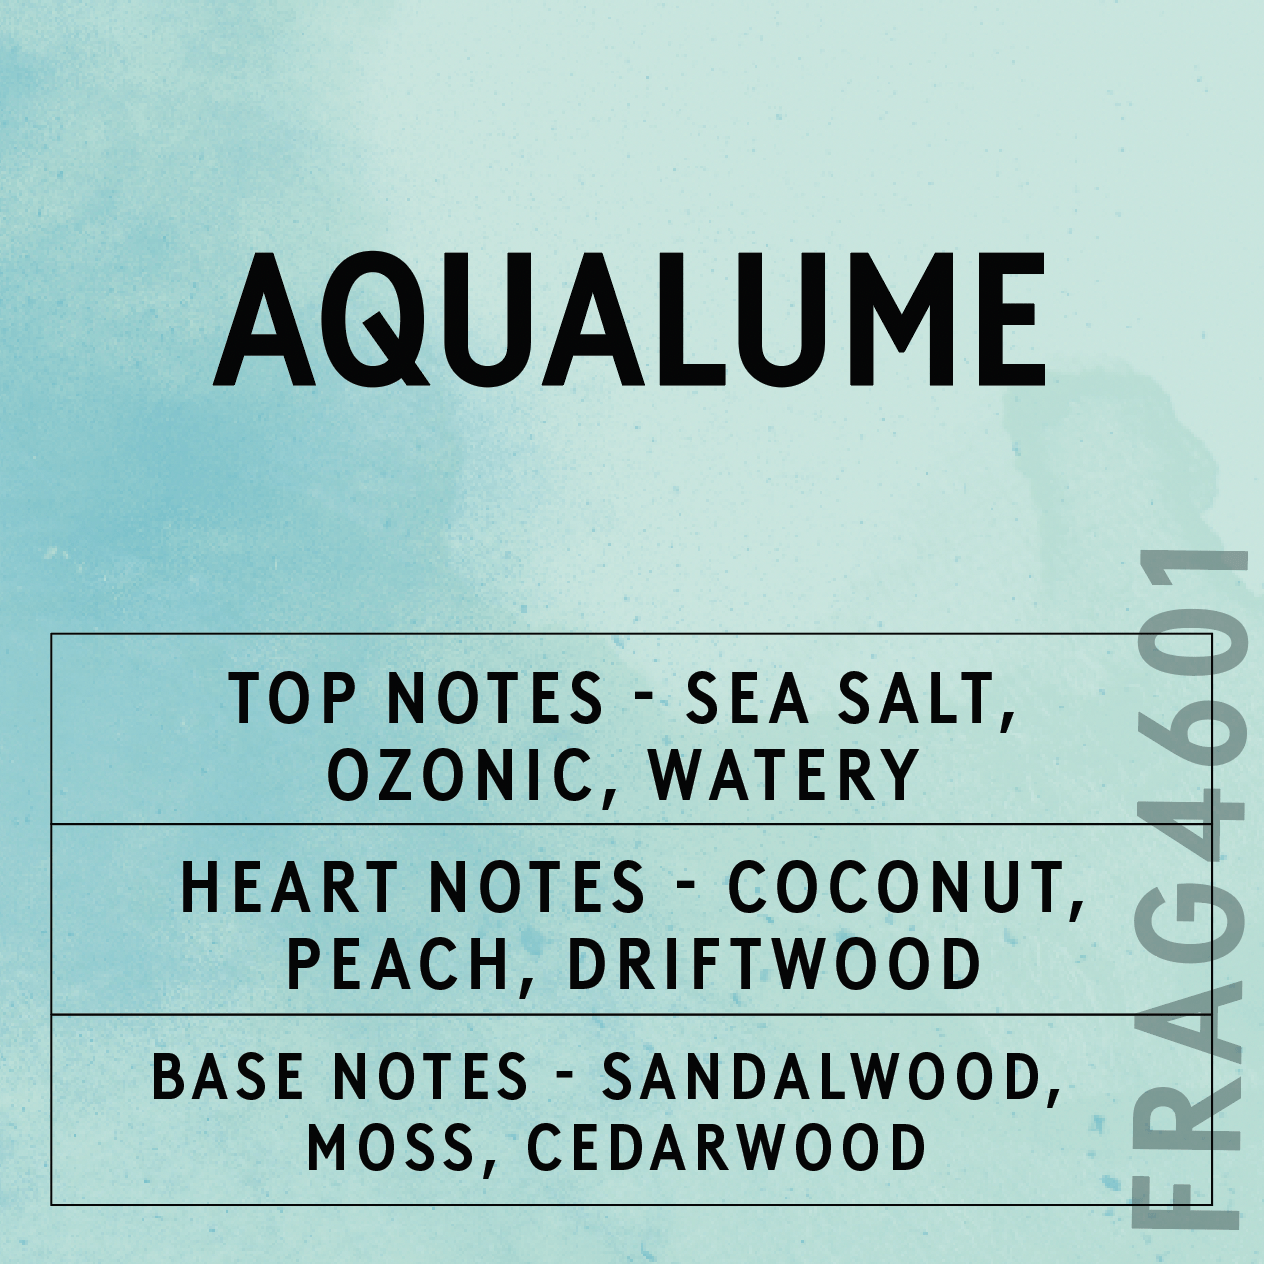 AquaLume Fragrance Oil scent card and fragrance notes